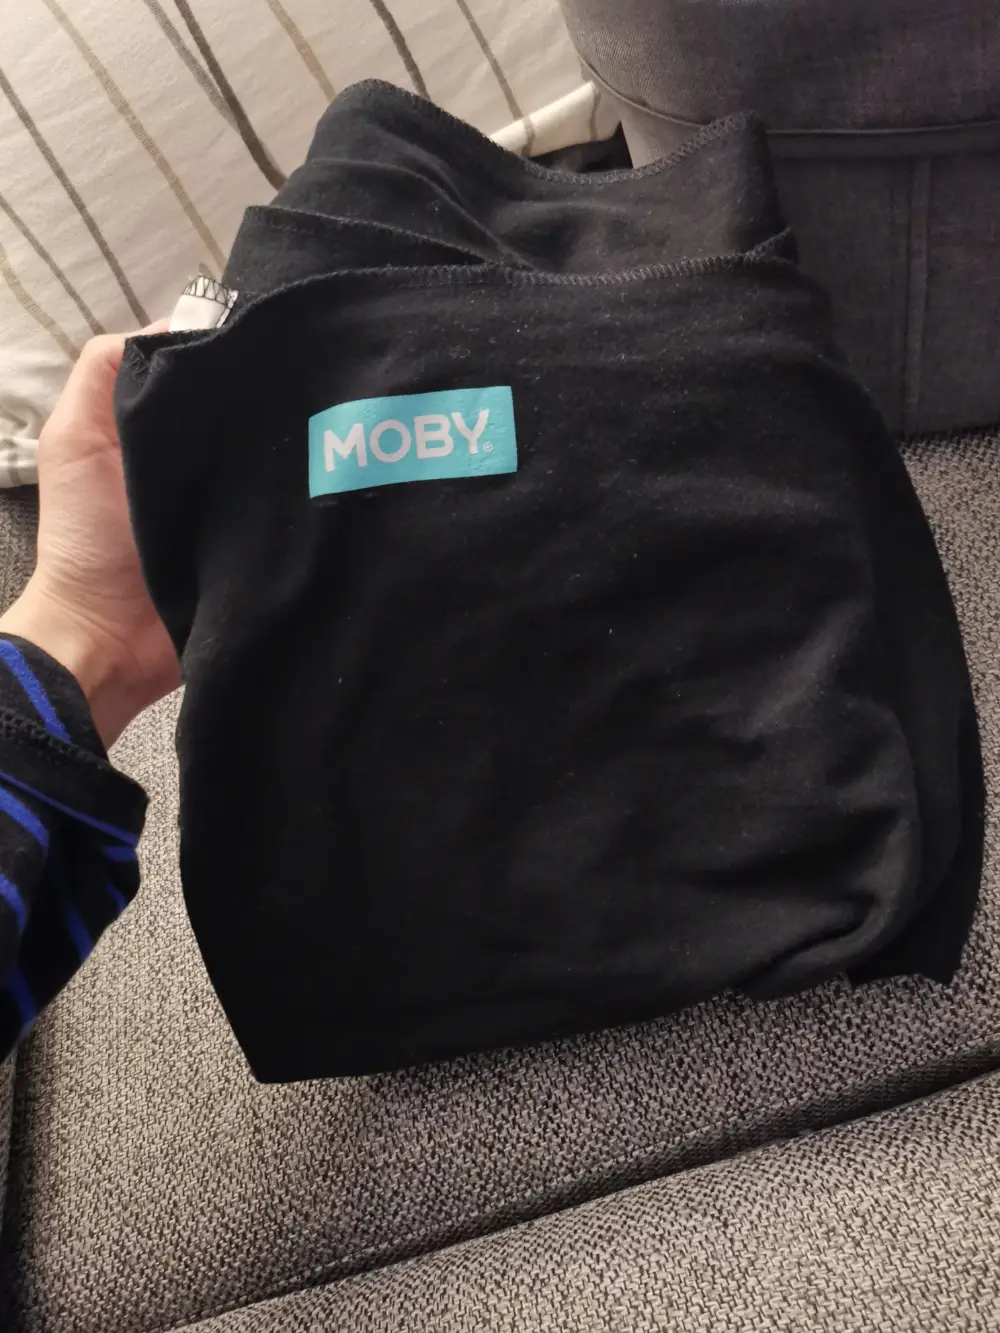 Moby Moby wrap